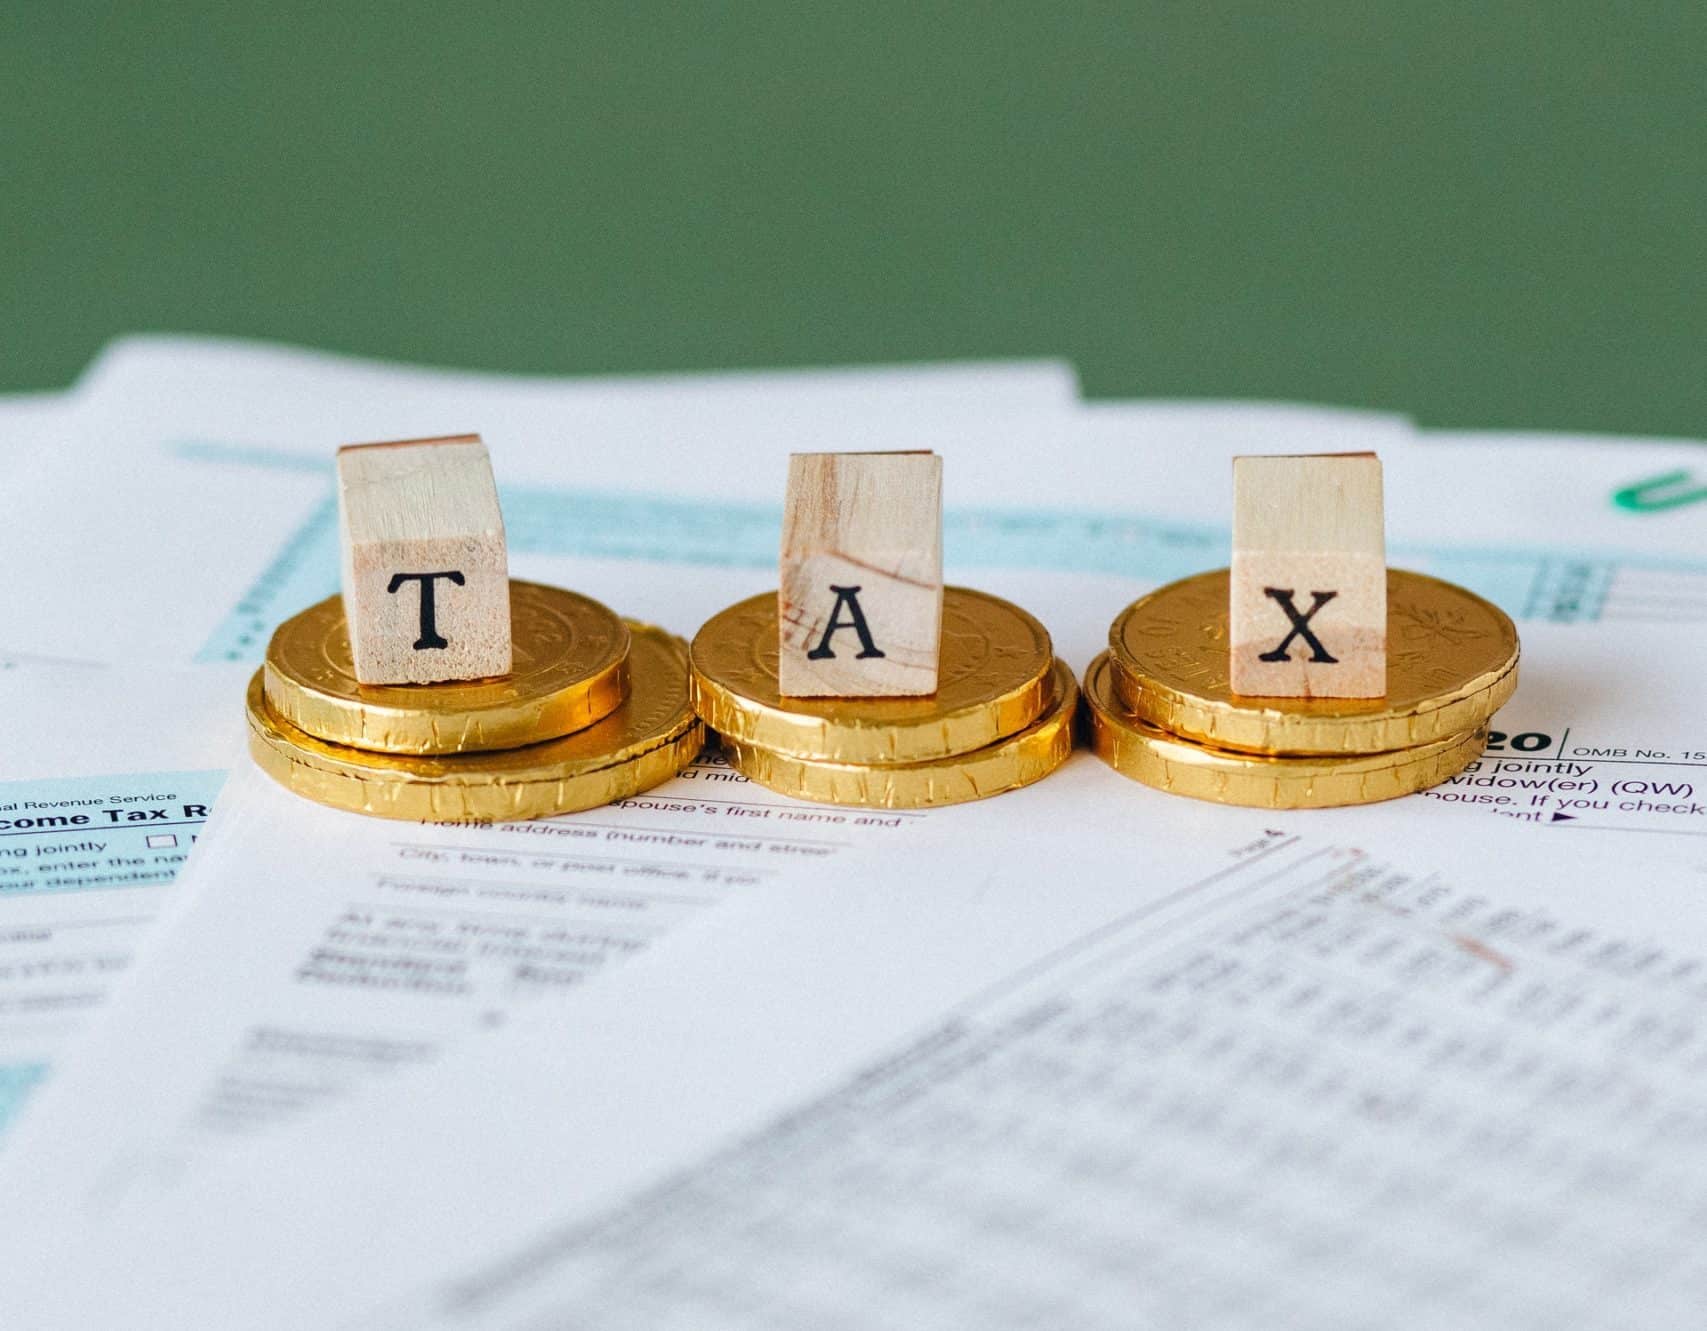 Ensure you’re tax and legally compliant – Part I